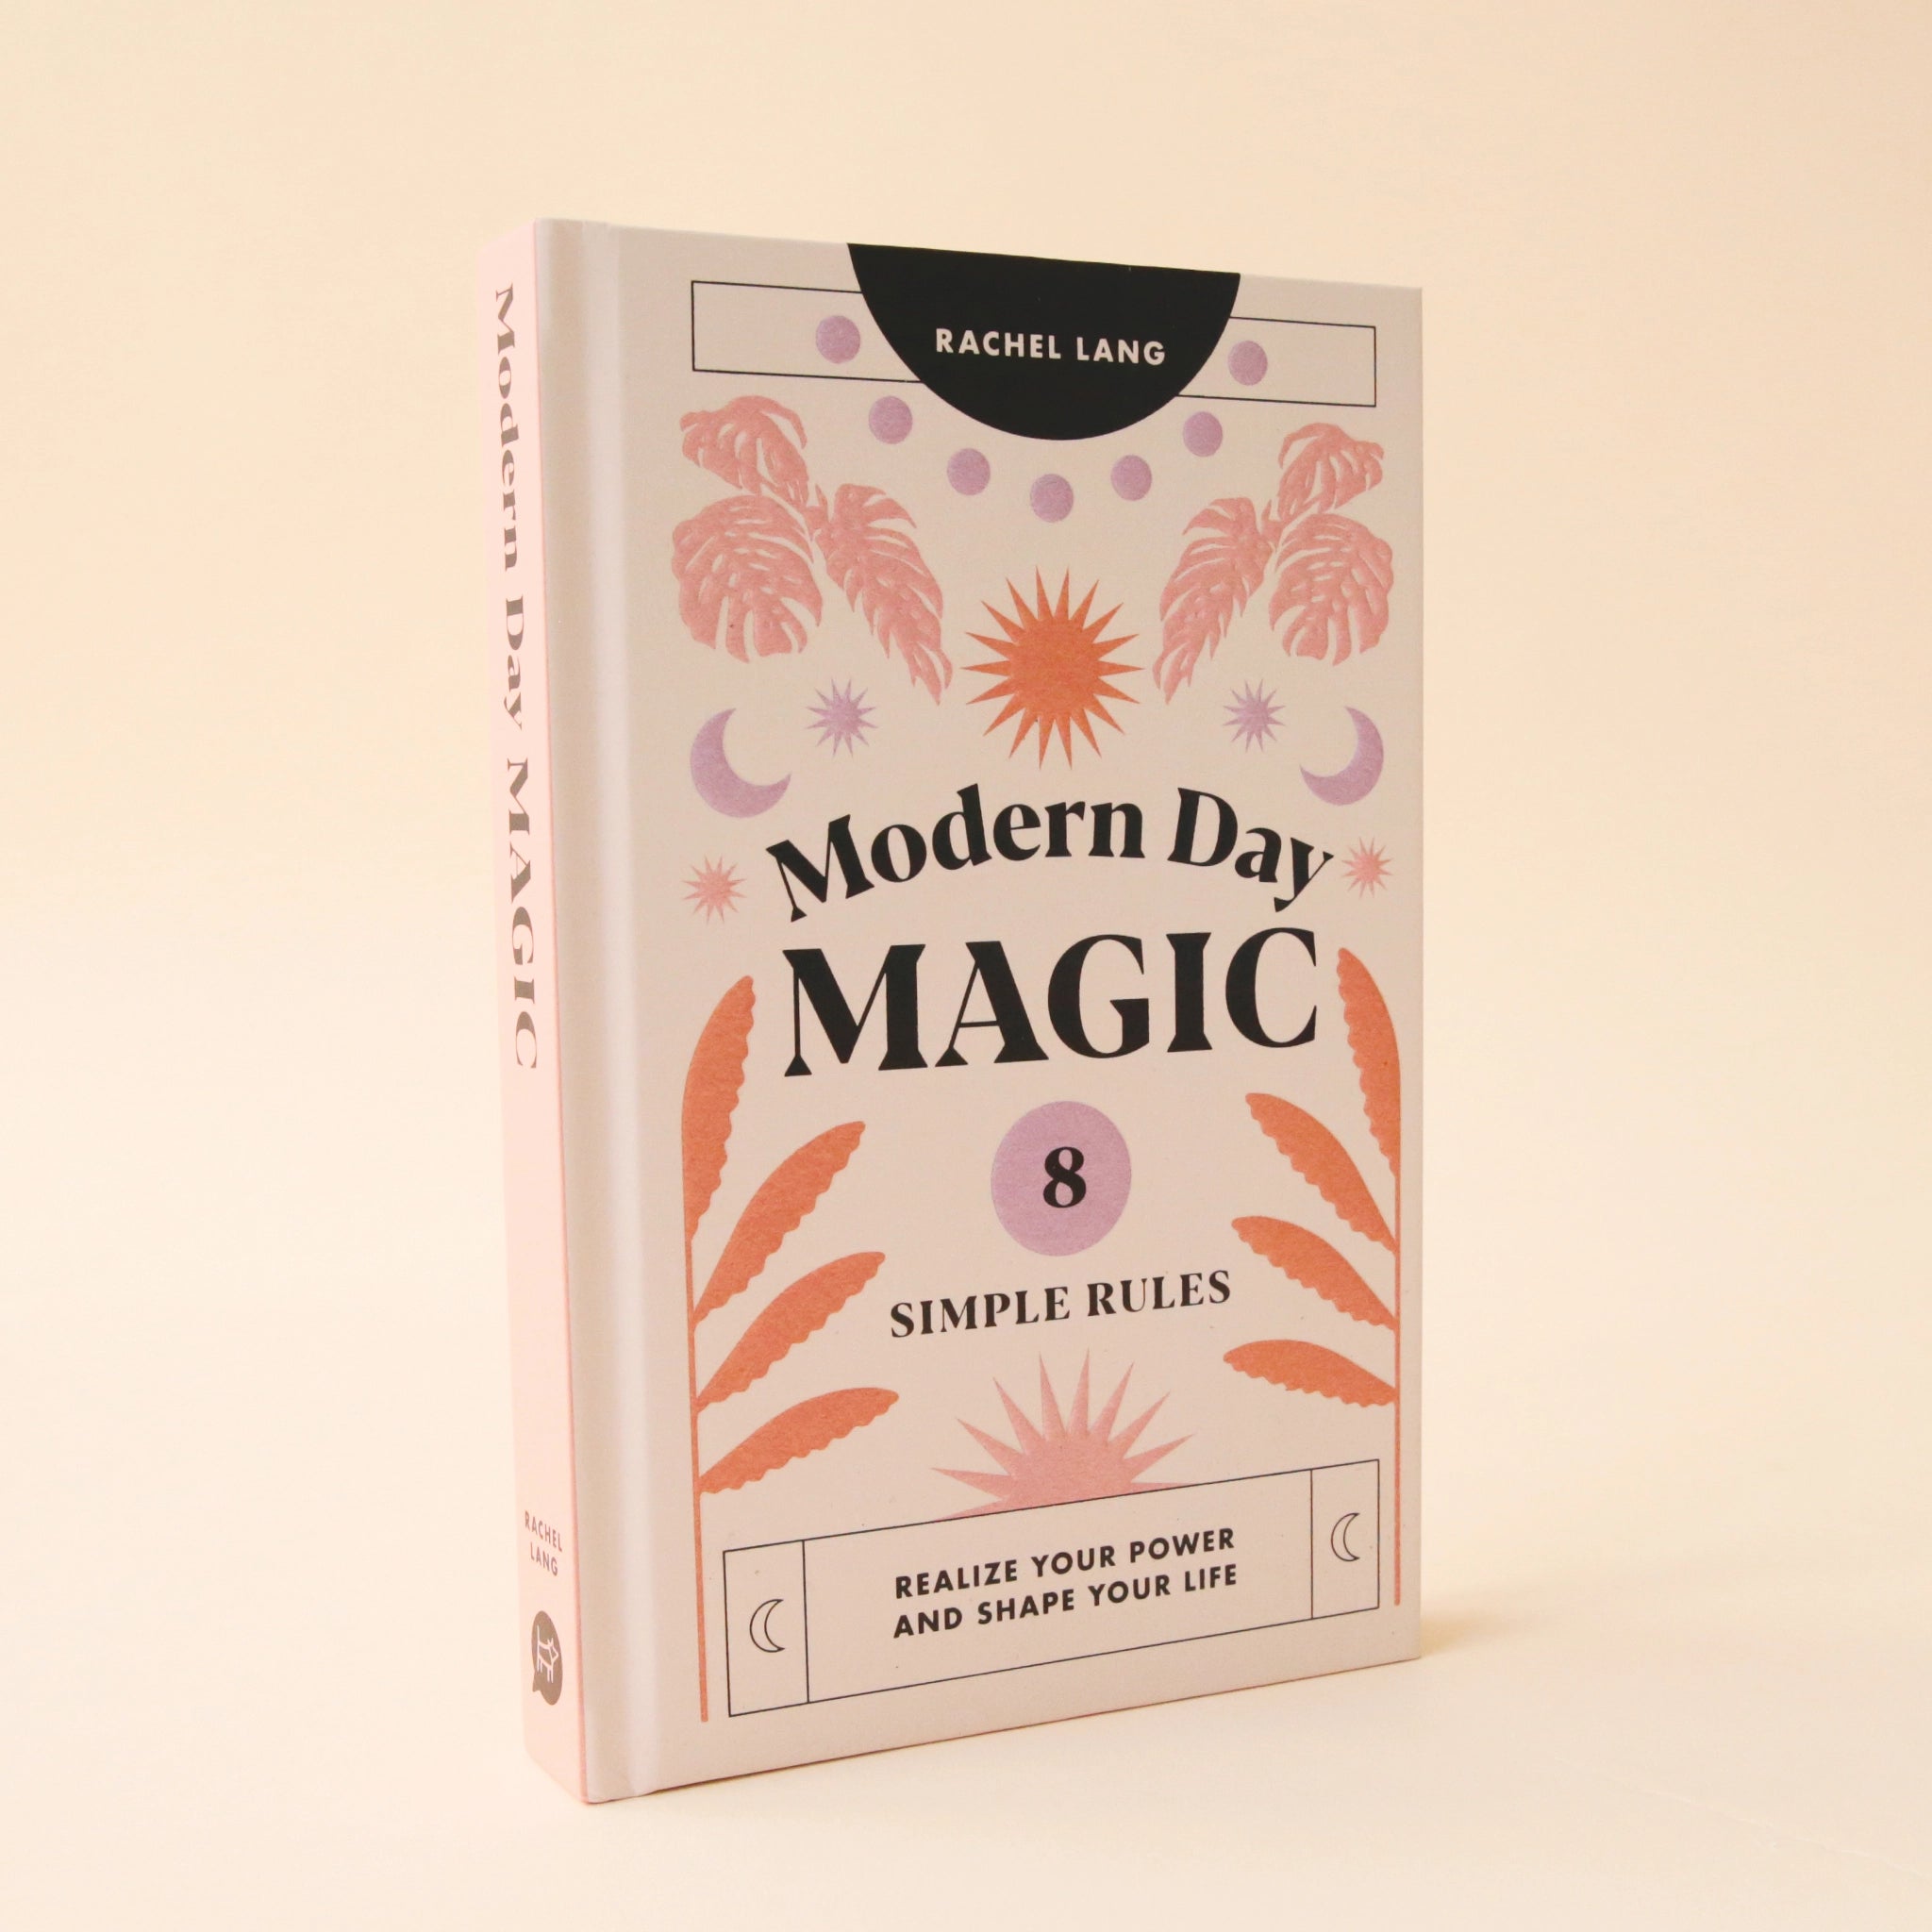 A light pink book cover with pink, lavender and orange foliage and sun and moon graphics along with black text that reads, "Modern Day Magic 8 Simple Rules Realize Your Power and Shape Your Life".